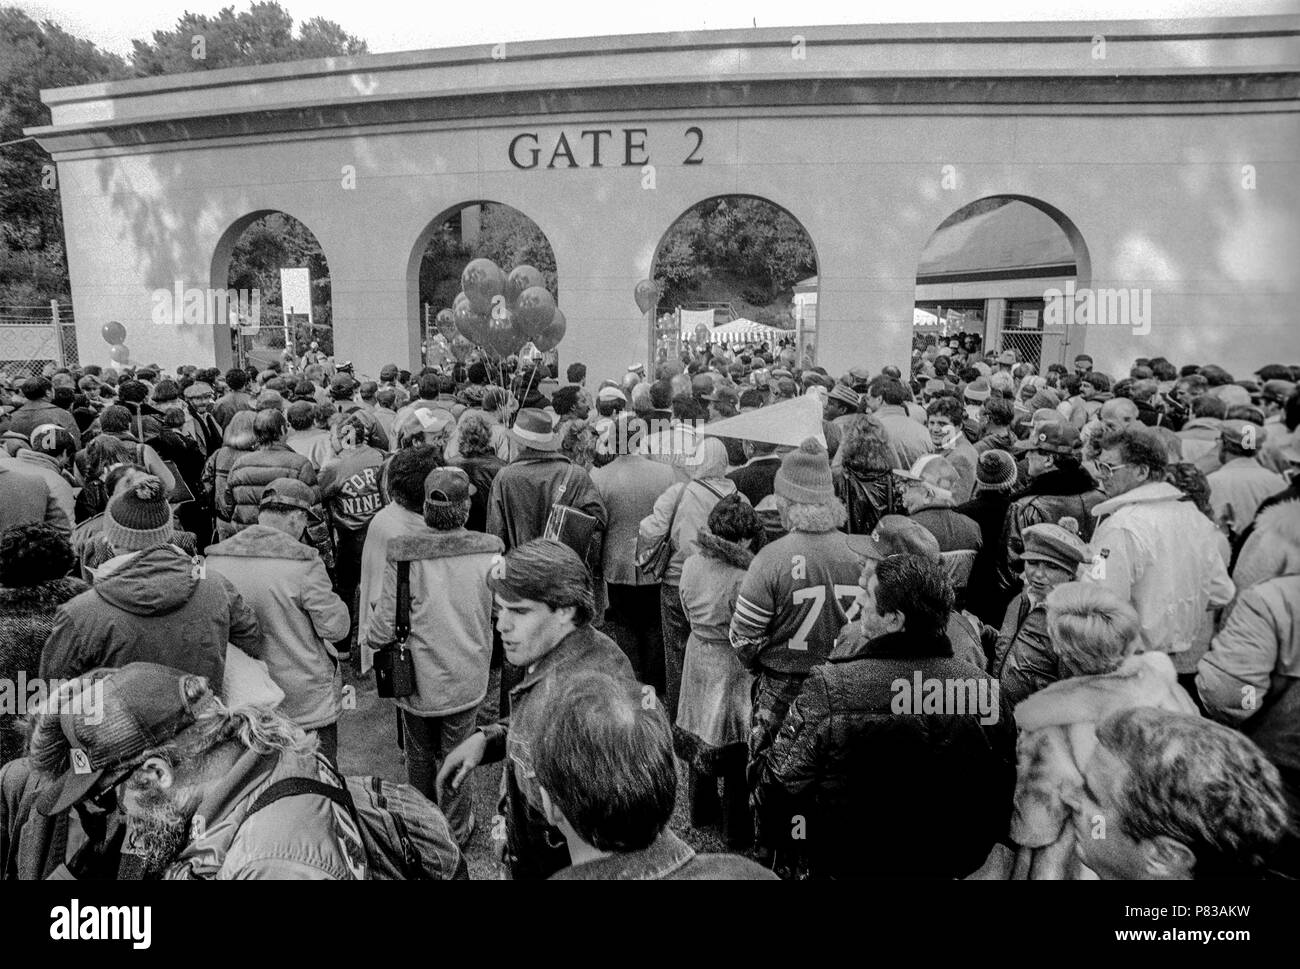 Stanford, California, USA. 20th Jan, 1985. Crowd files through gate 2 into the stadium after leaving the Super Bowl XIX tailgate on the Stanford University campus. The San Francisco 49ers defeated the Miami Dolphins 38-16 on Sunday, January 20, 1985. Credit: Al Golub/ZUMA Wire/Alamy Live News Stock Photo